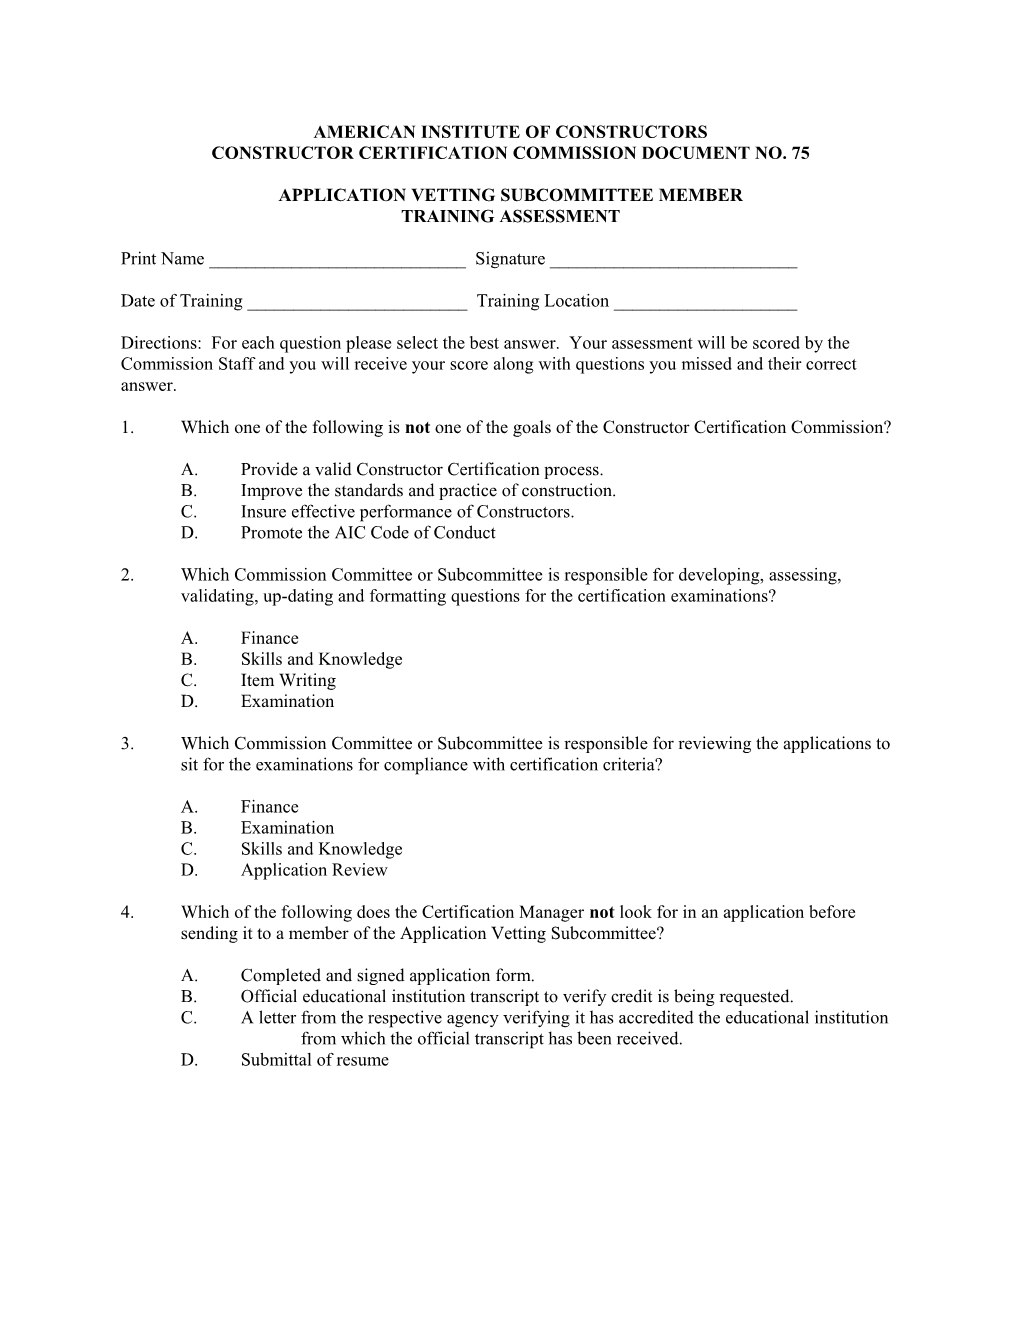 Commission Document No. 75 - Application Vetting Subcommittee Training Assessment